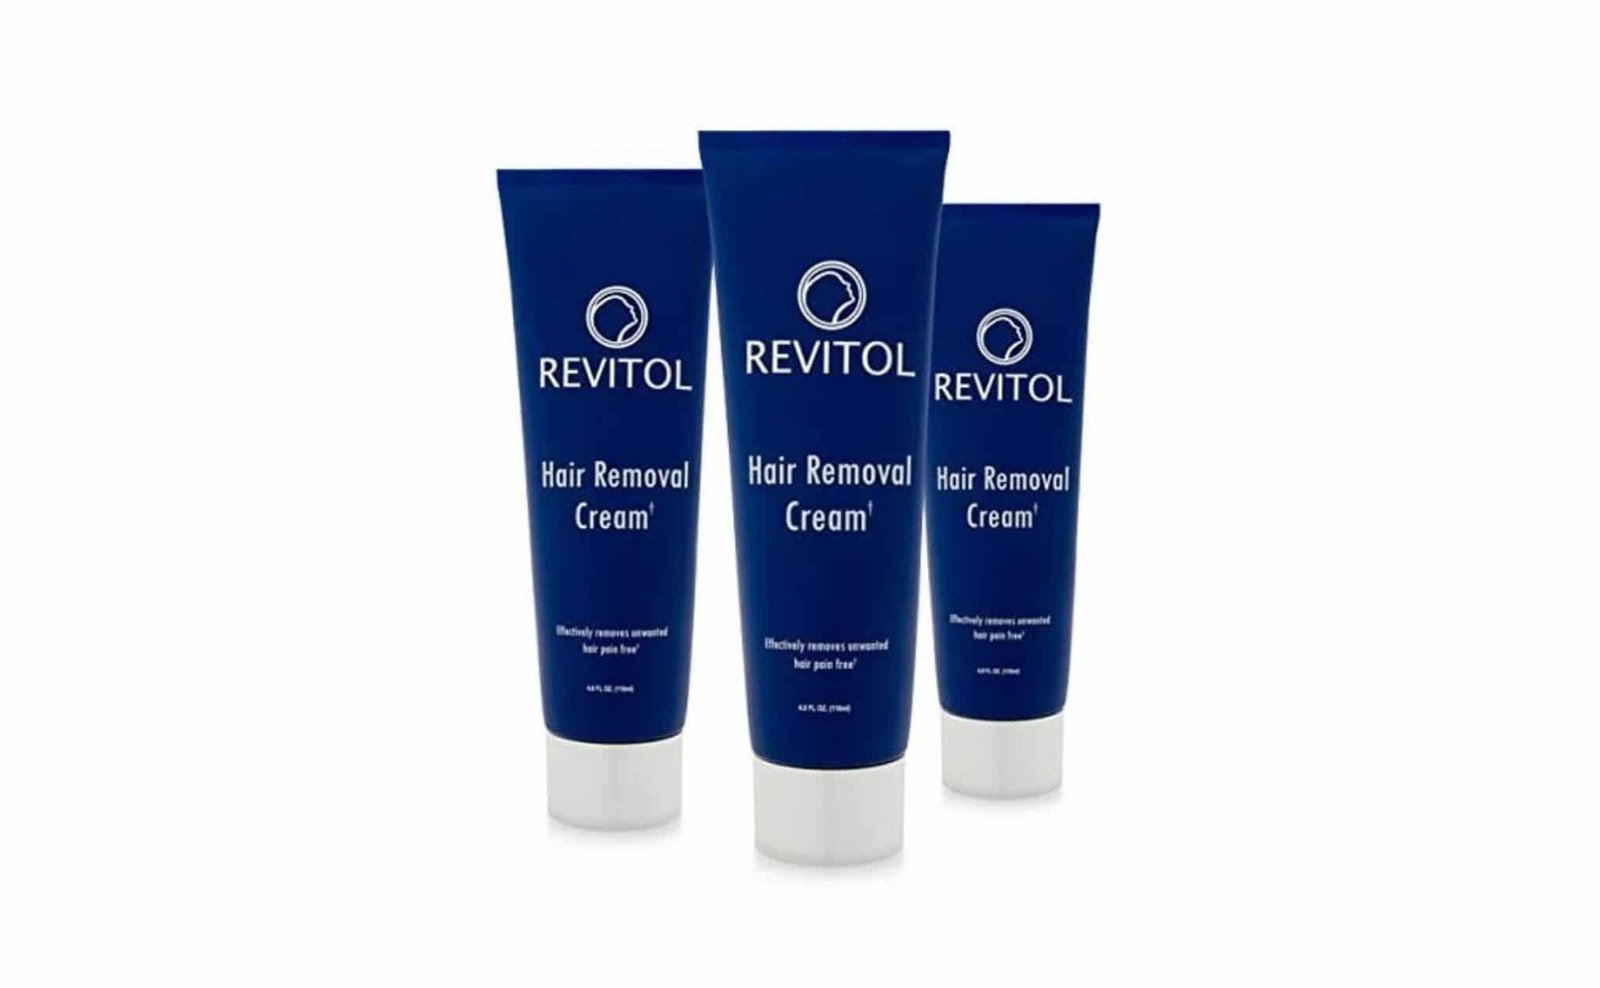 How Does Revitol Hair Removal Work